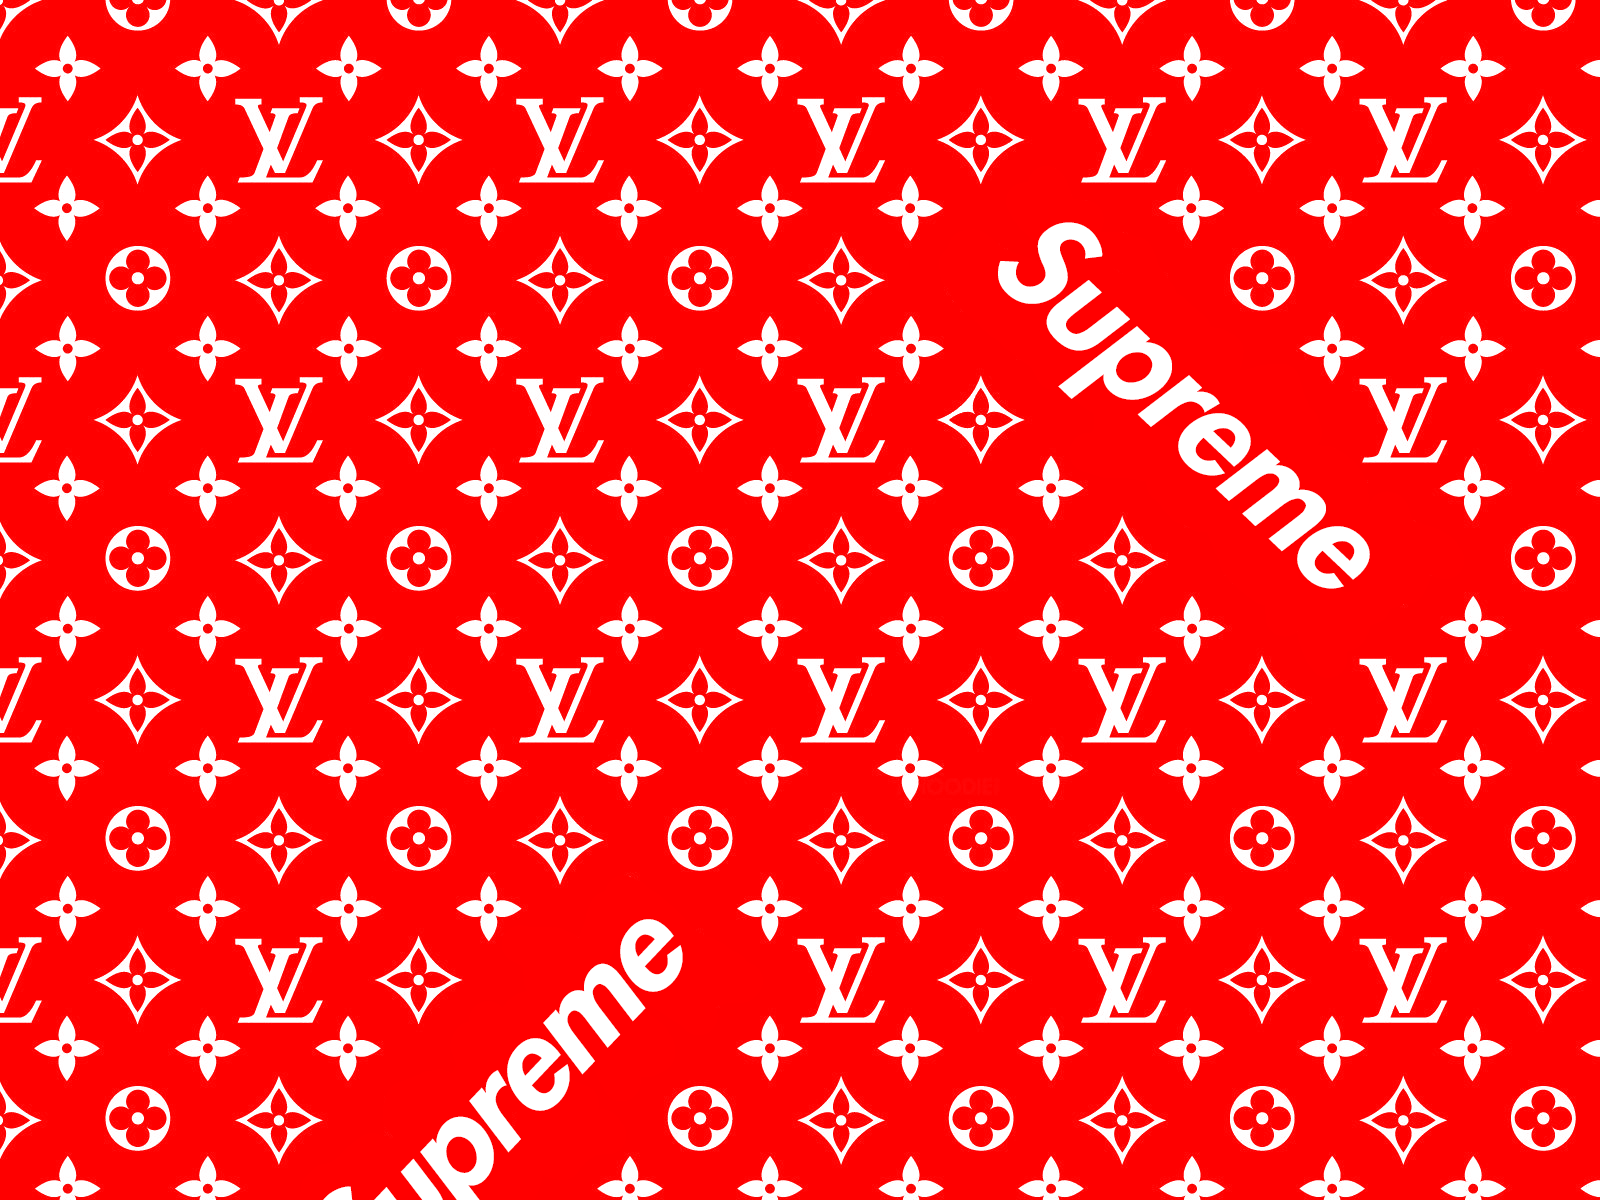 Full Hd Of Just Make Supremelouis Vuitton Wallpapers Does It Looks